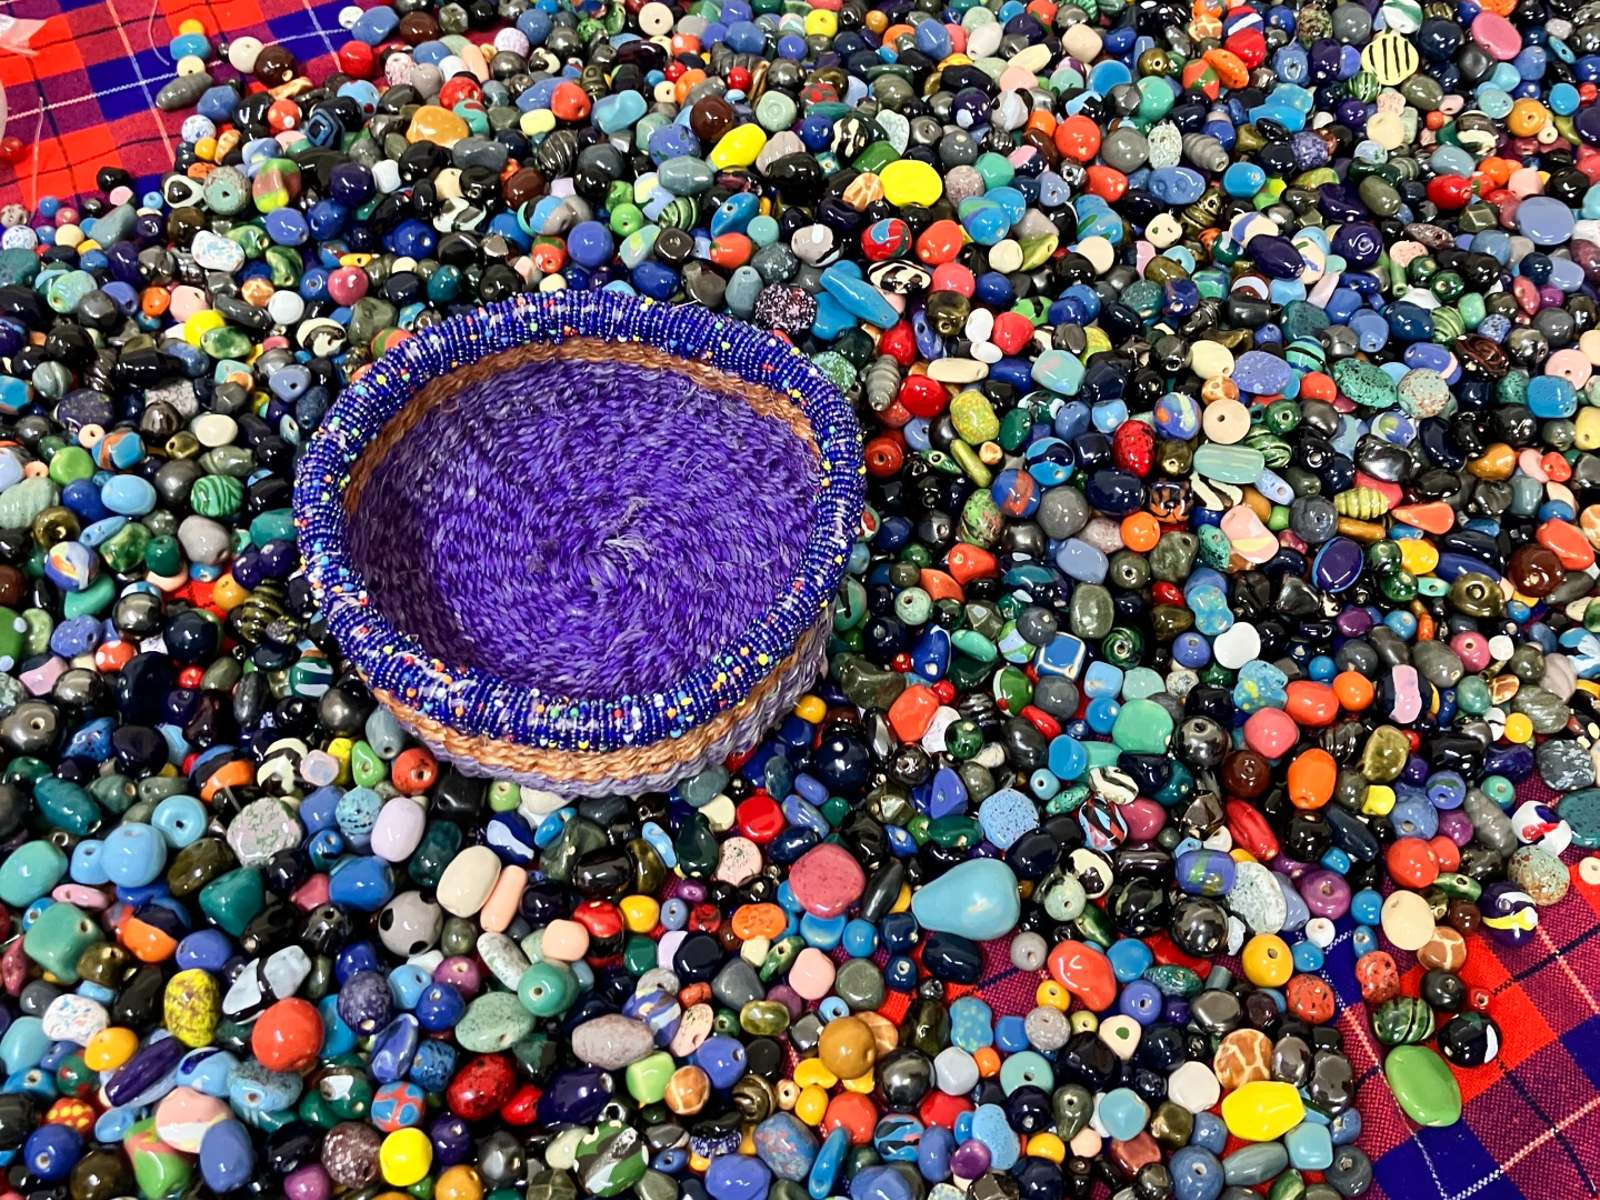 A collection of colorful beads.